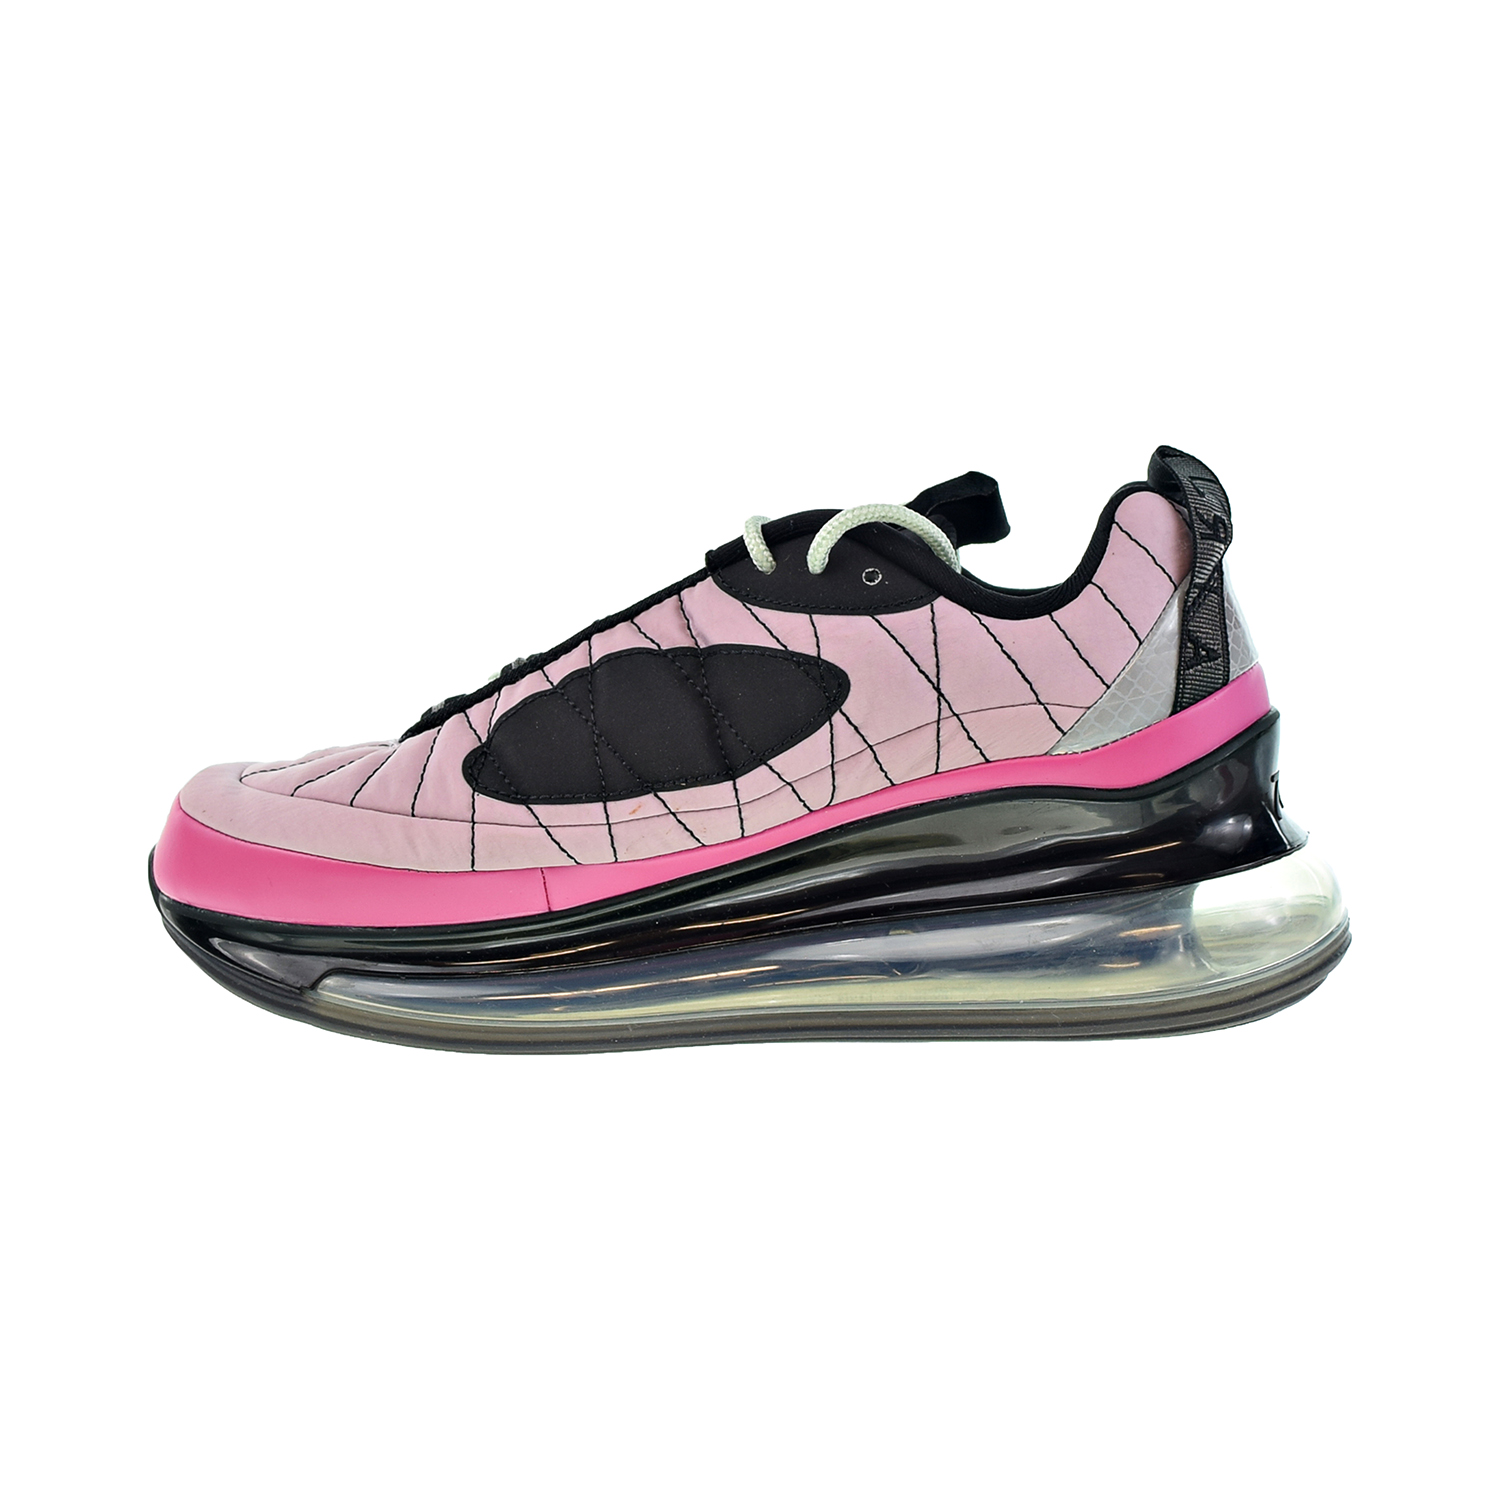 Nike Air Max 720-818 Women's Shoes Iced Lilac-Cosmic Fuchsia ci3869-500 - image 4 of 6